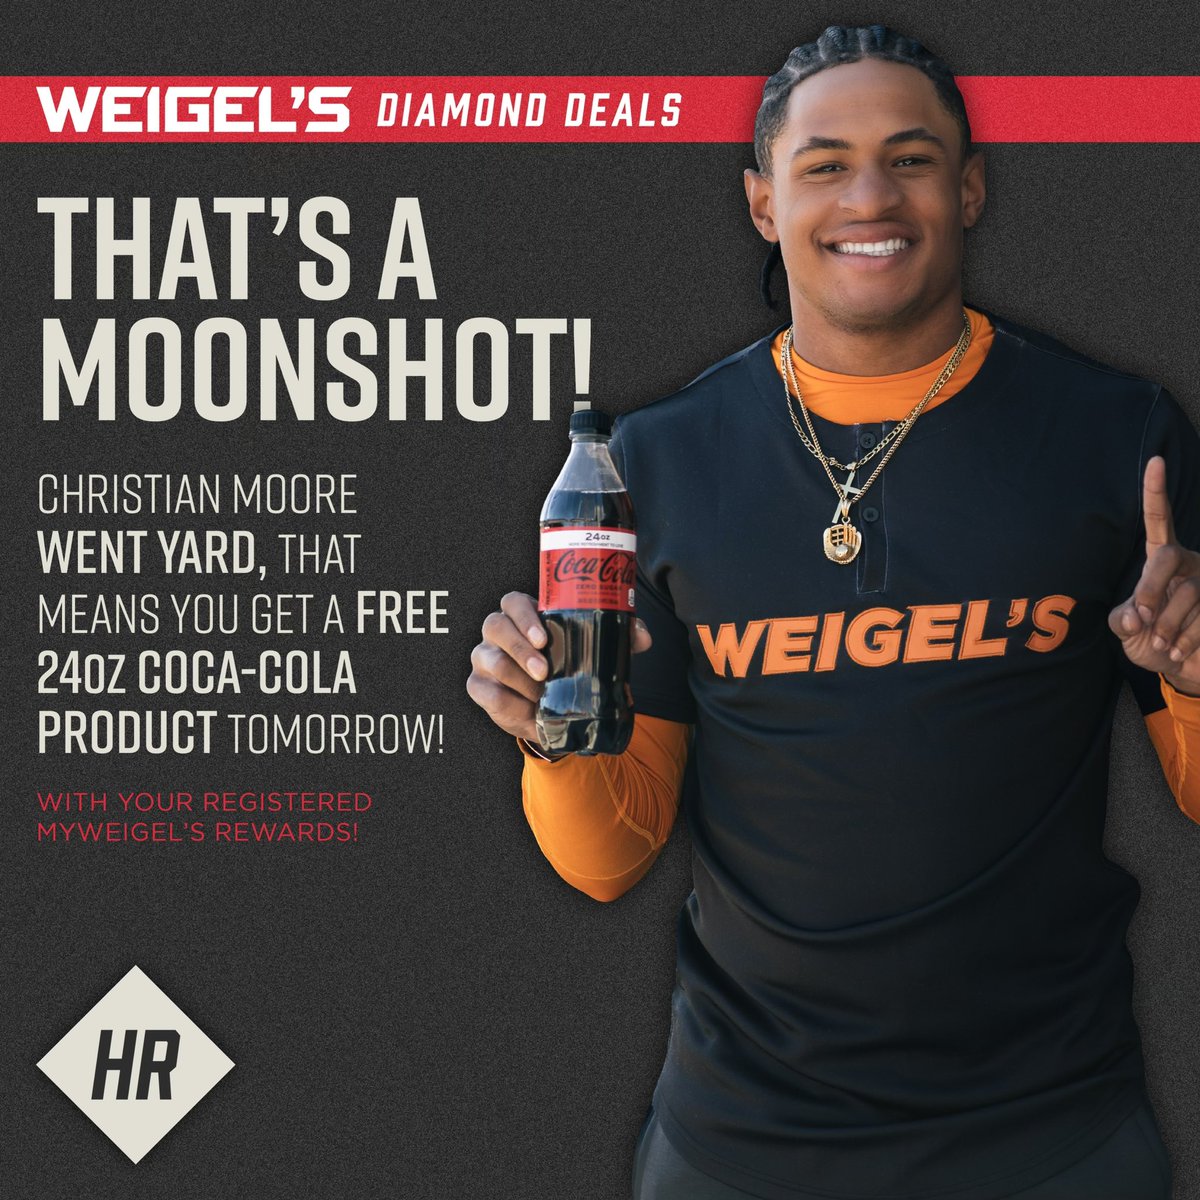 That's a moonshot! Christian Moore has gone yard ladies and gentlemen... which means you get a FREE 24OZ Coca-Cola product tomorrow with your MyWeigel's Rewards Card. Thanks C-Mo!